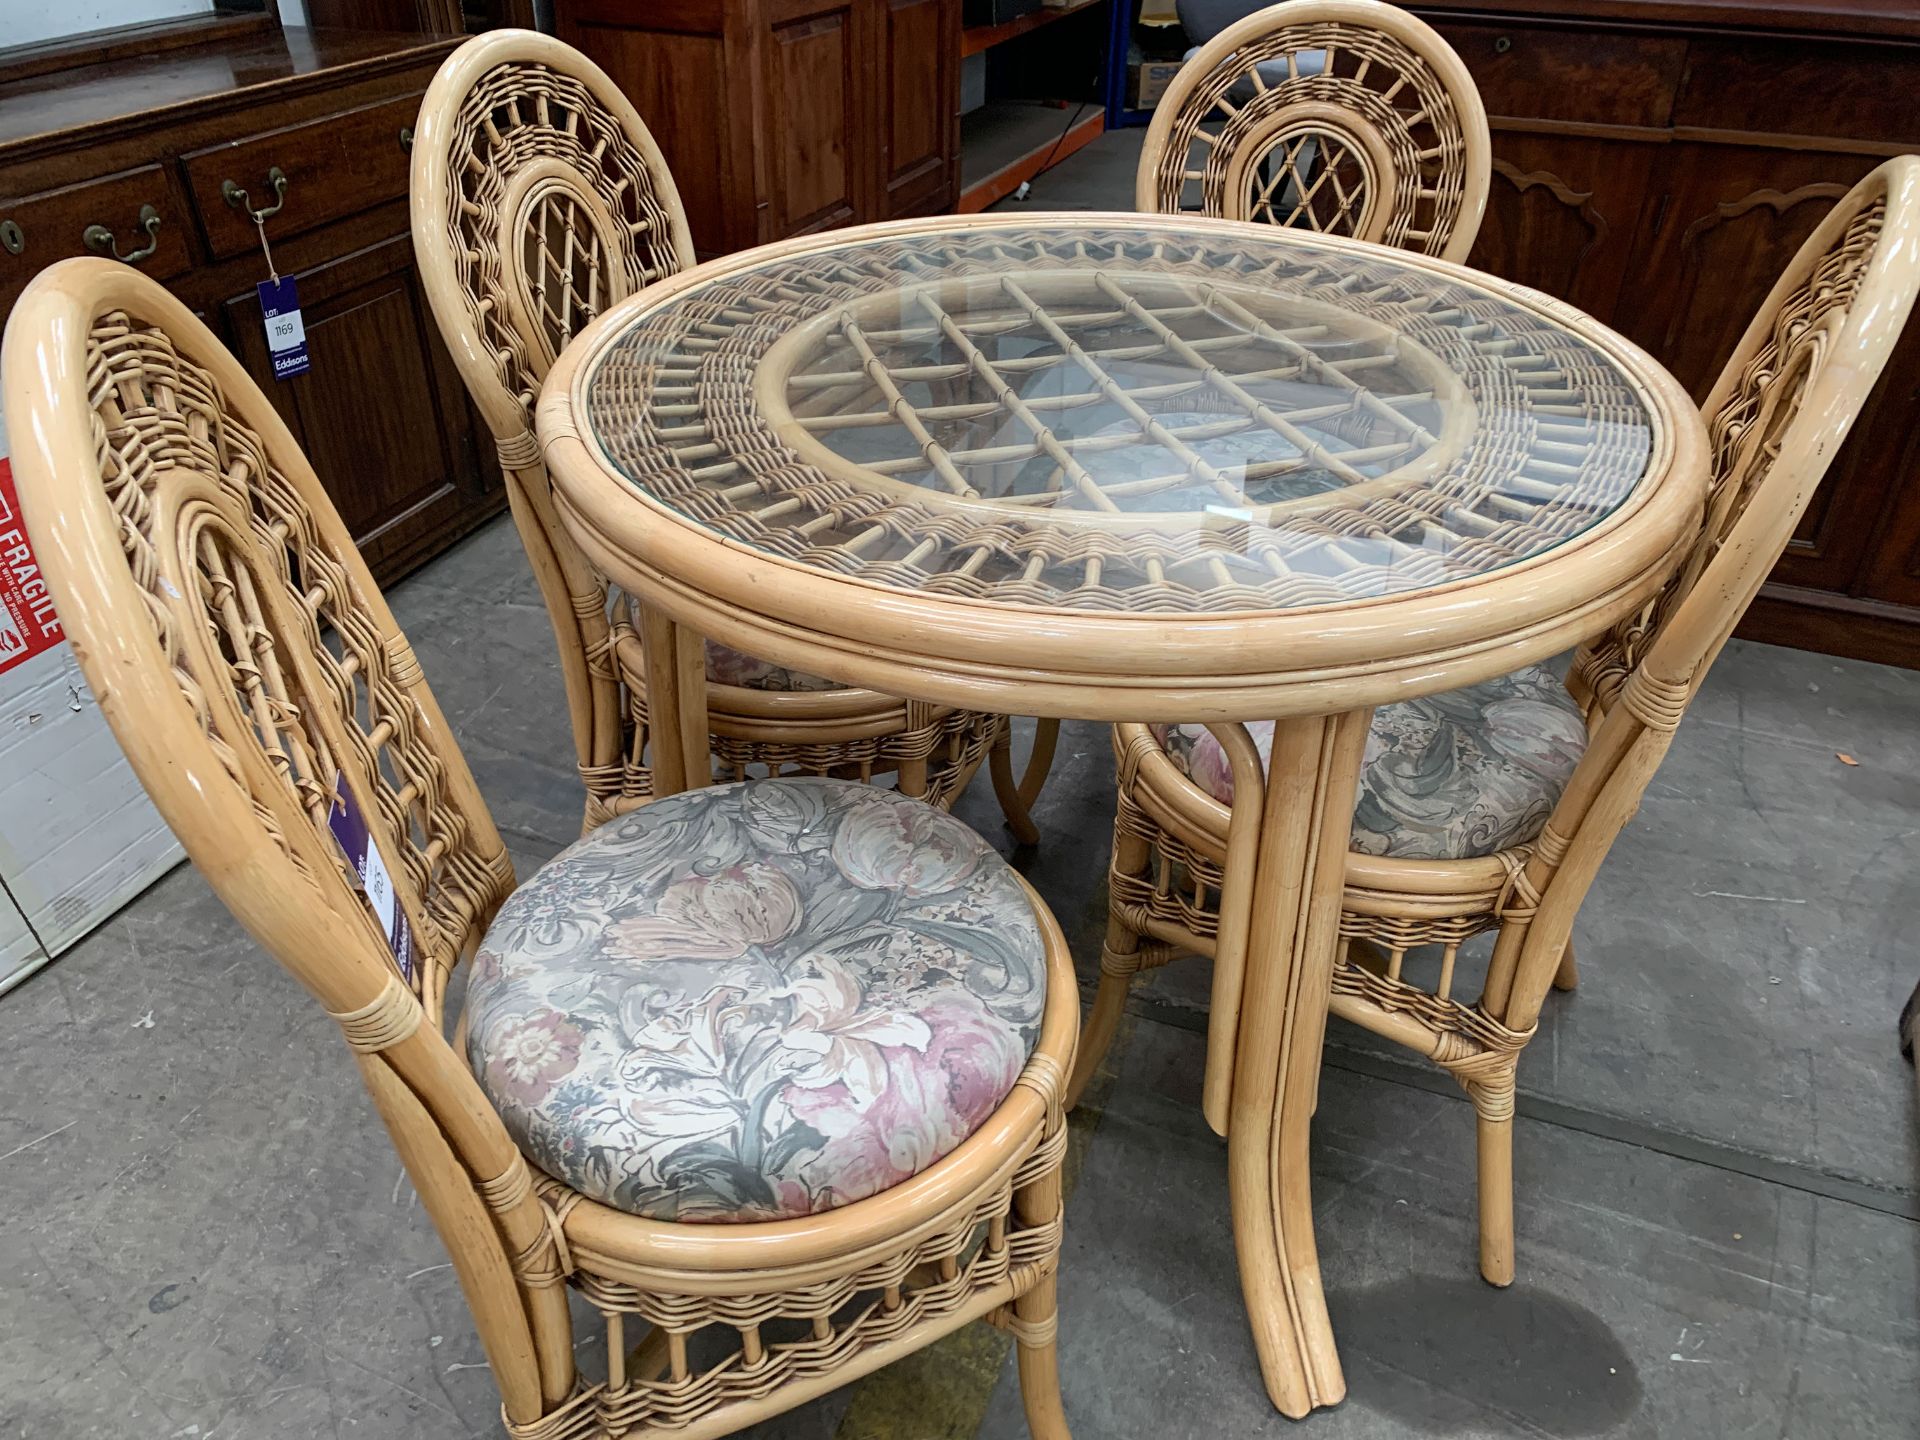 5pc Conservatory Suite with Glass Top Round Table & 4 Chairs - Image 3 of 3